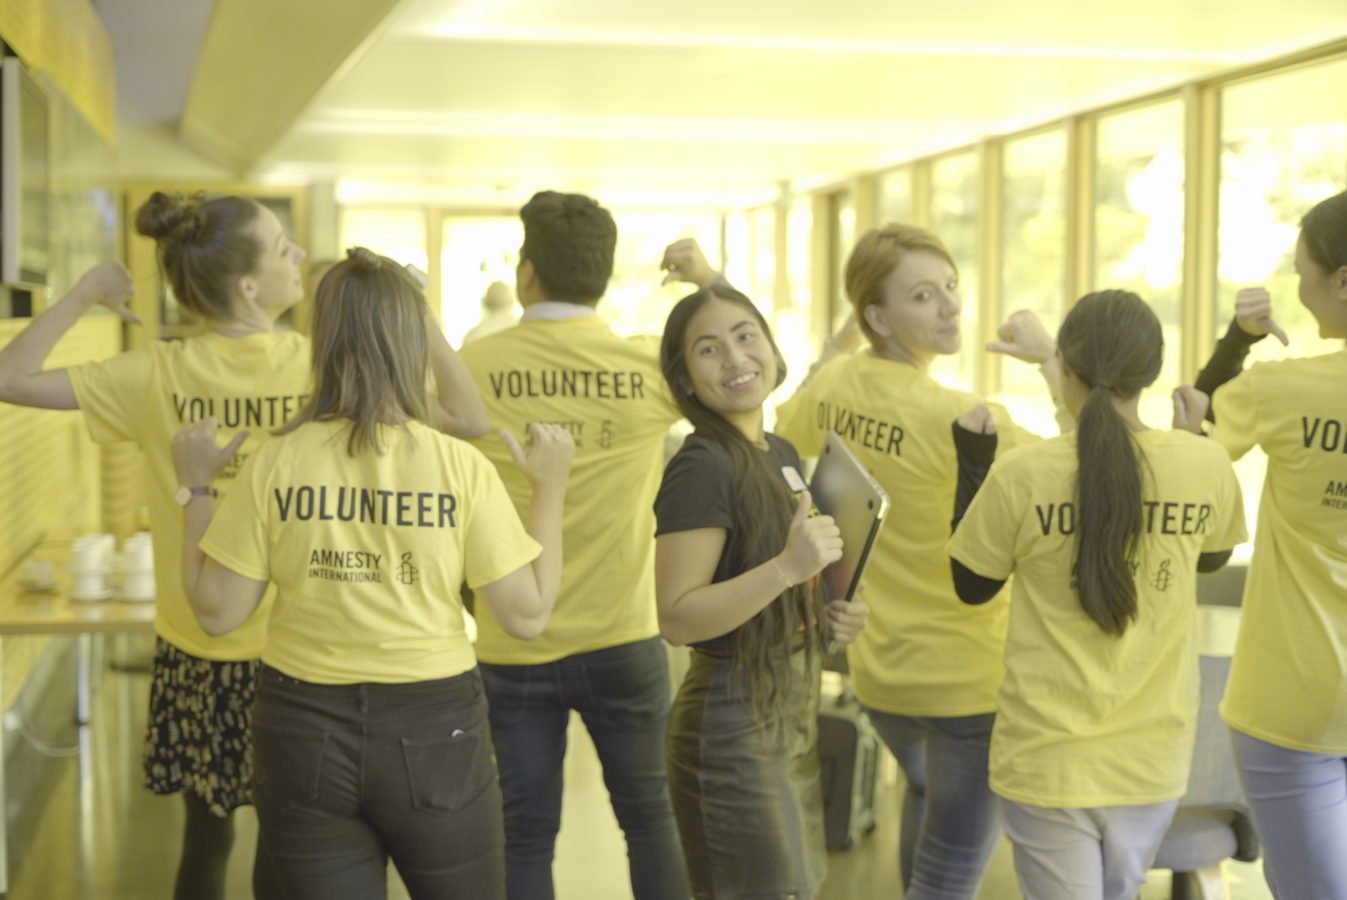 Volunteers stand with their backs to the camera, showing the backof their shirts that say 'volunteer'. They hold up their arms in a muscle flexing pose.